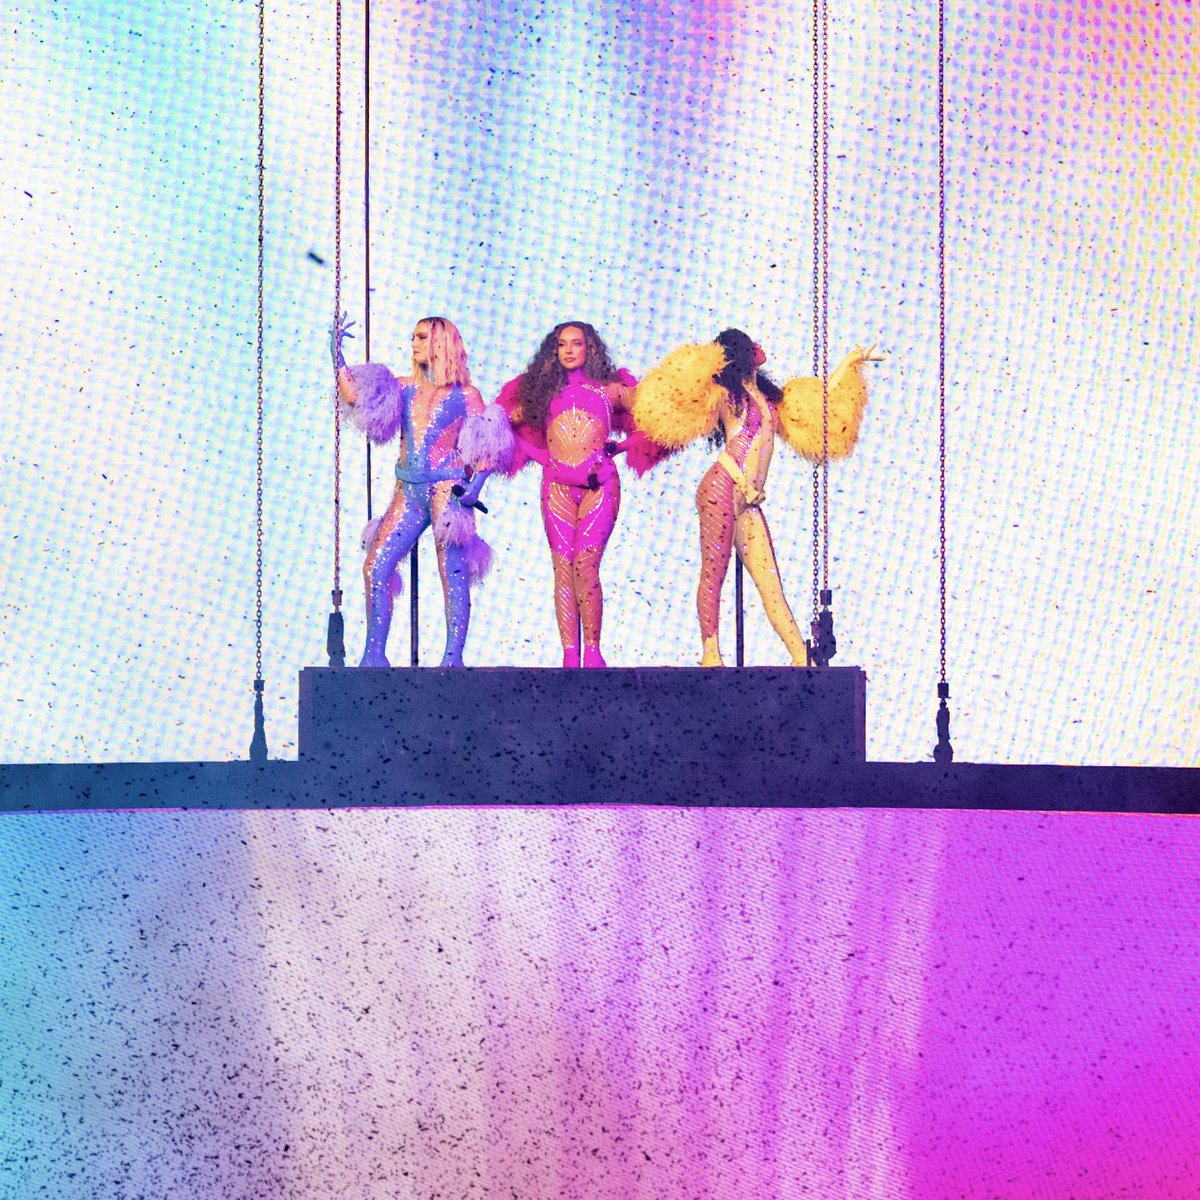 Missing these outfits already 😭😭💕💕 You can watch the final show of our #ConfettiTour until midnight tonight! Link below ✨ #LittleMixLastShow driift.link/TheLastShow